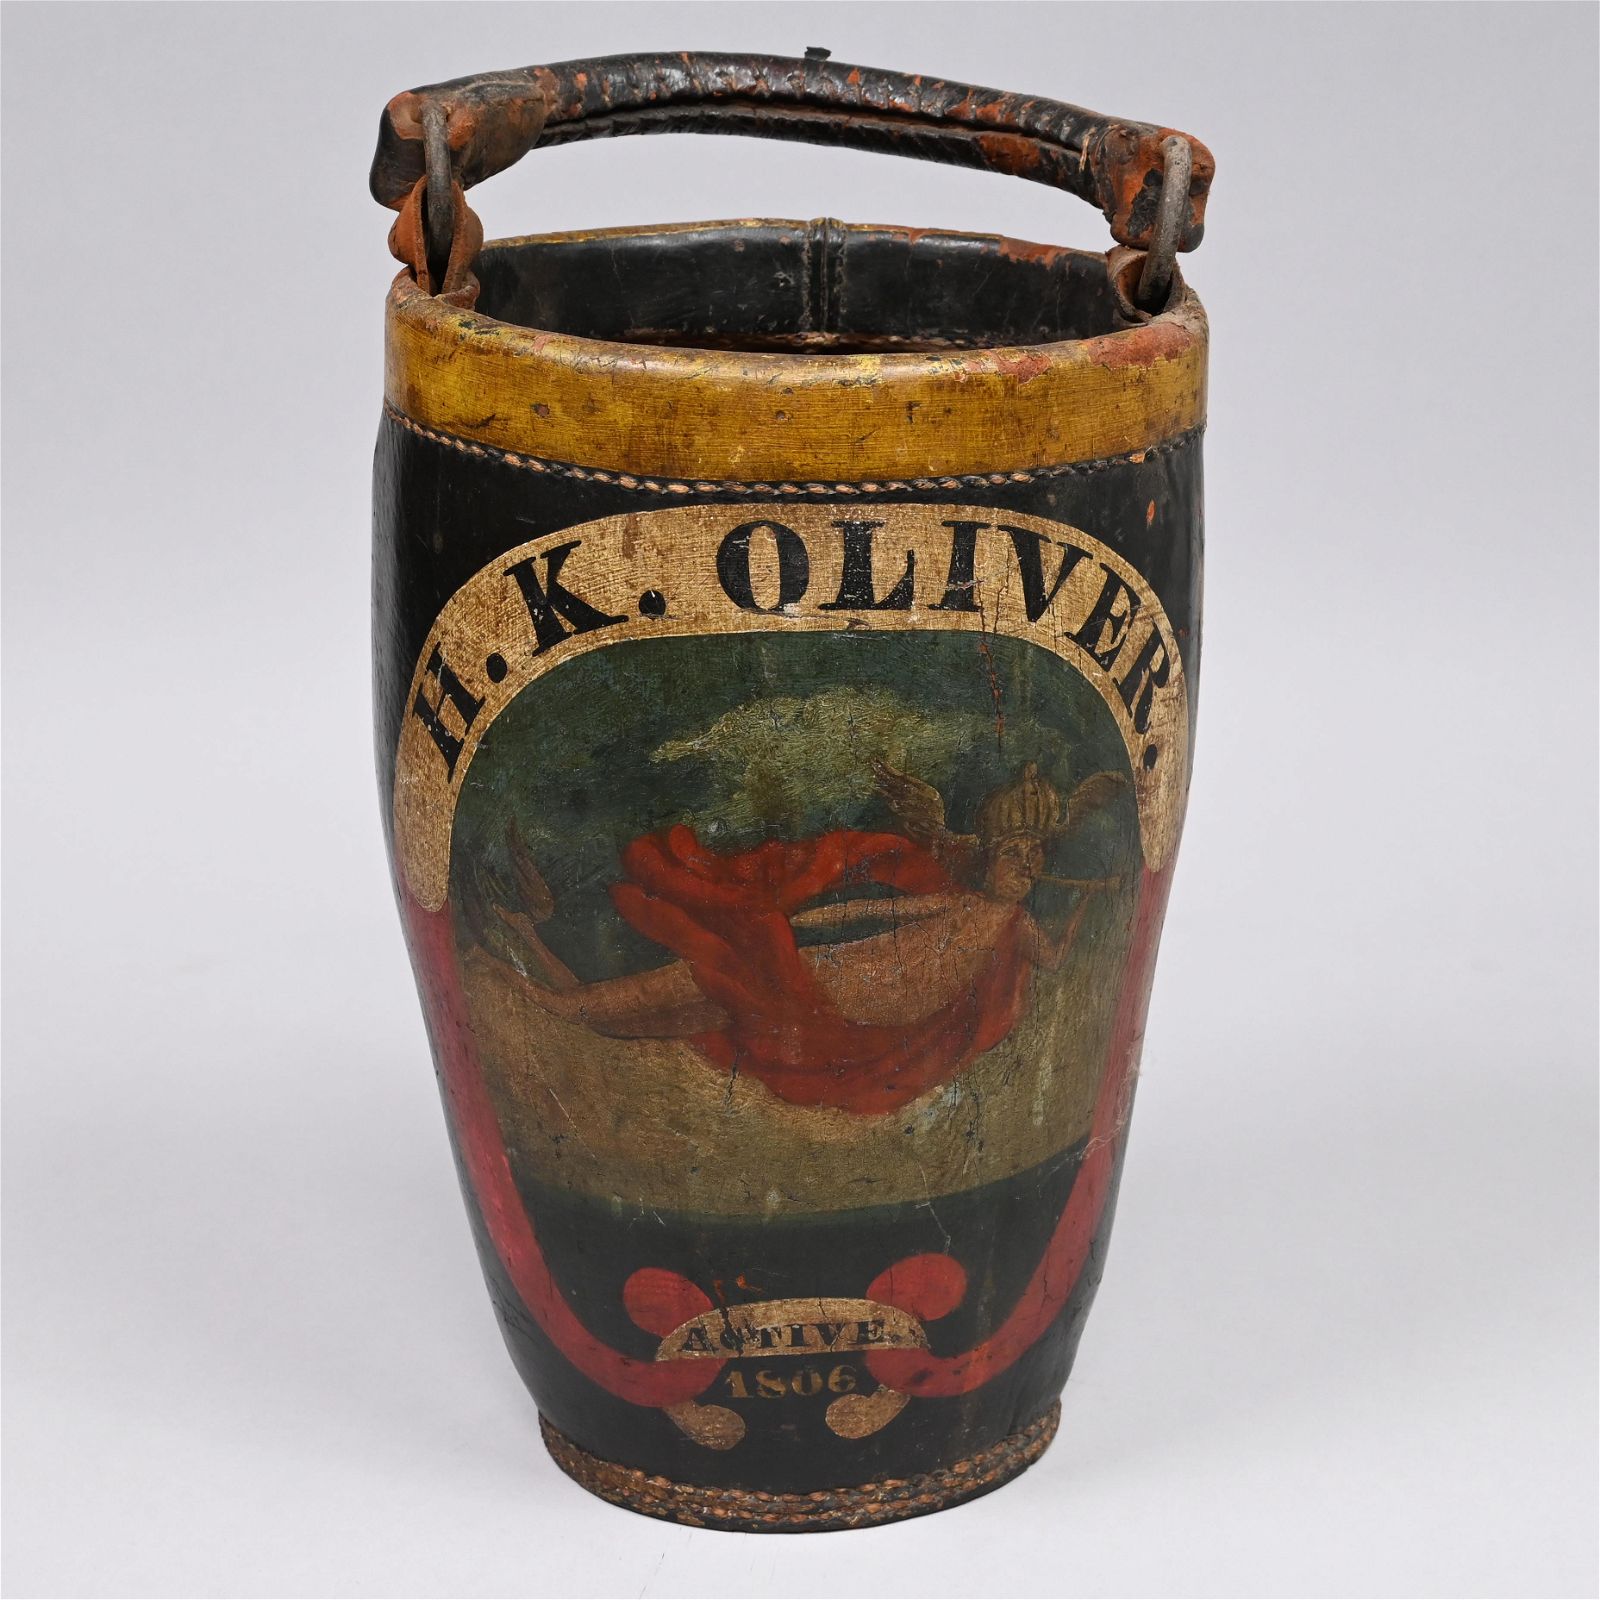 H.K. Oliver's Painted Leather Fire Bucket, 1806